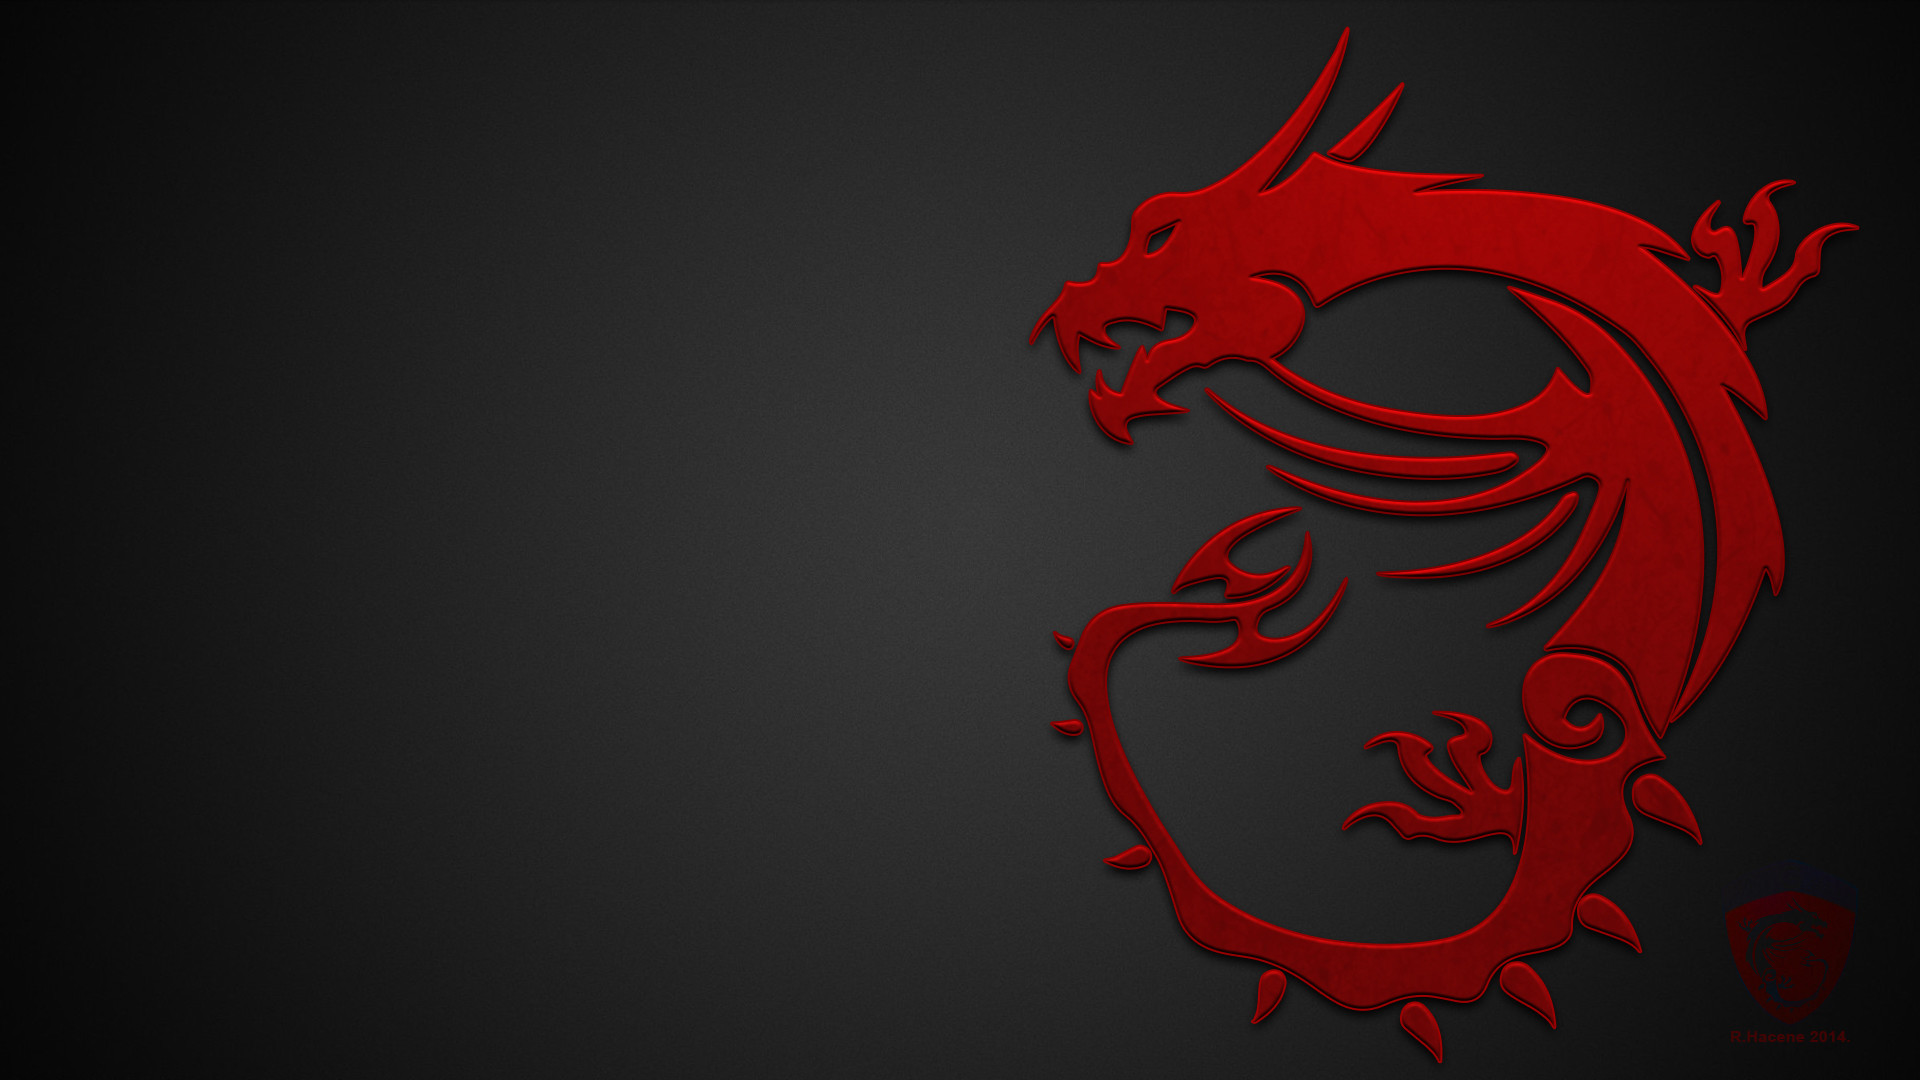 1920x1080 awesome MSI Laptop Background Collections - Set 1